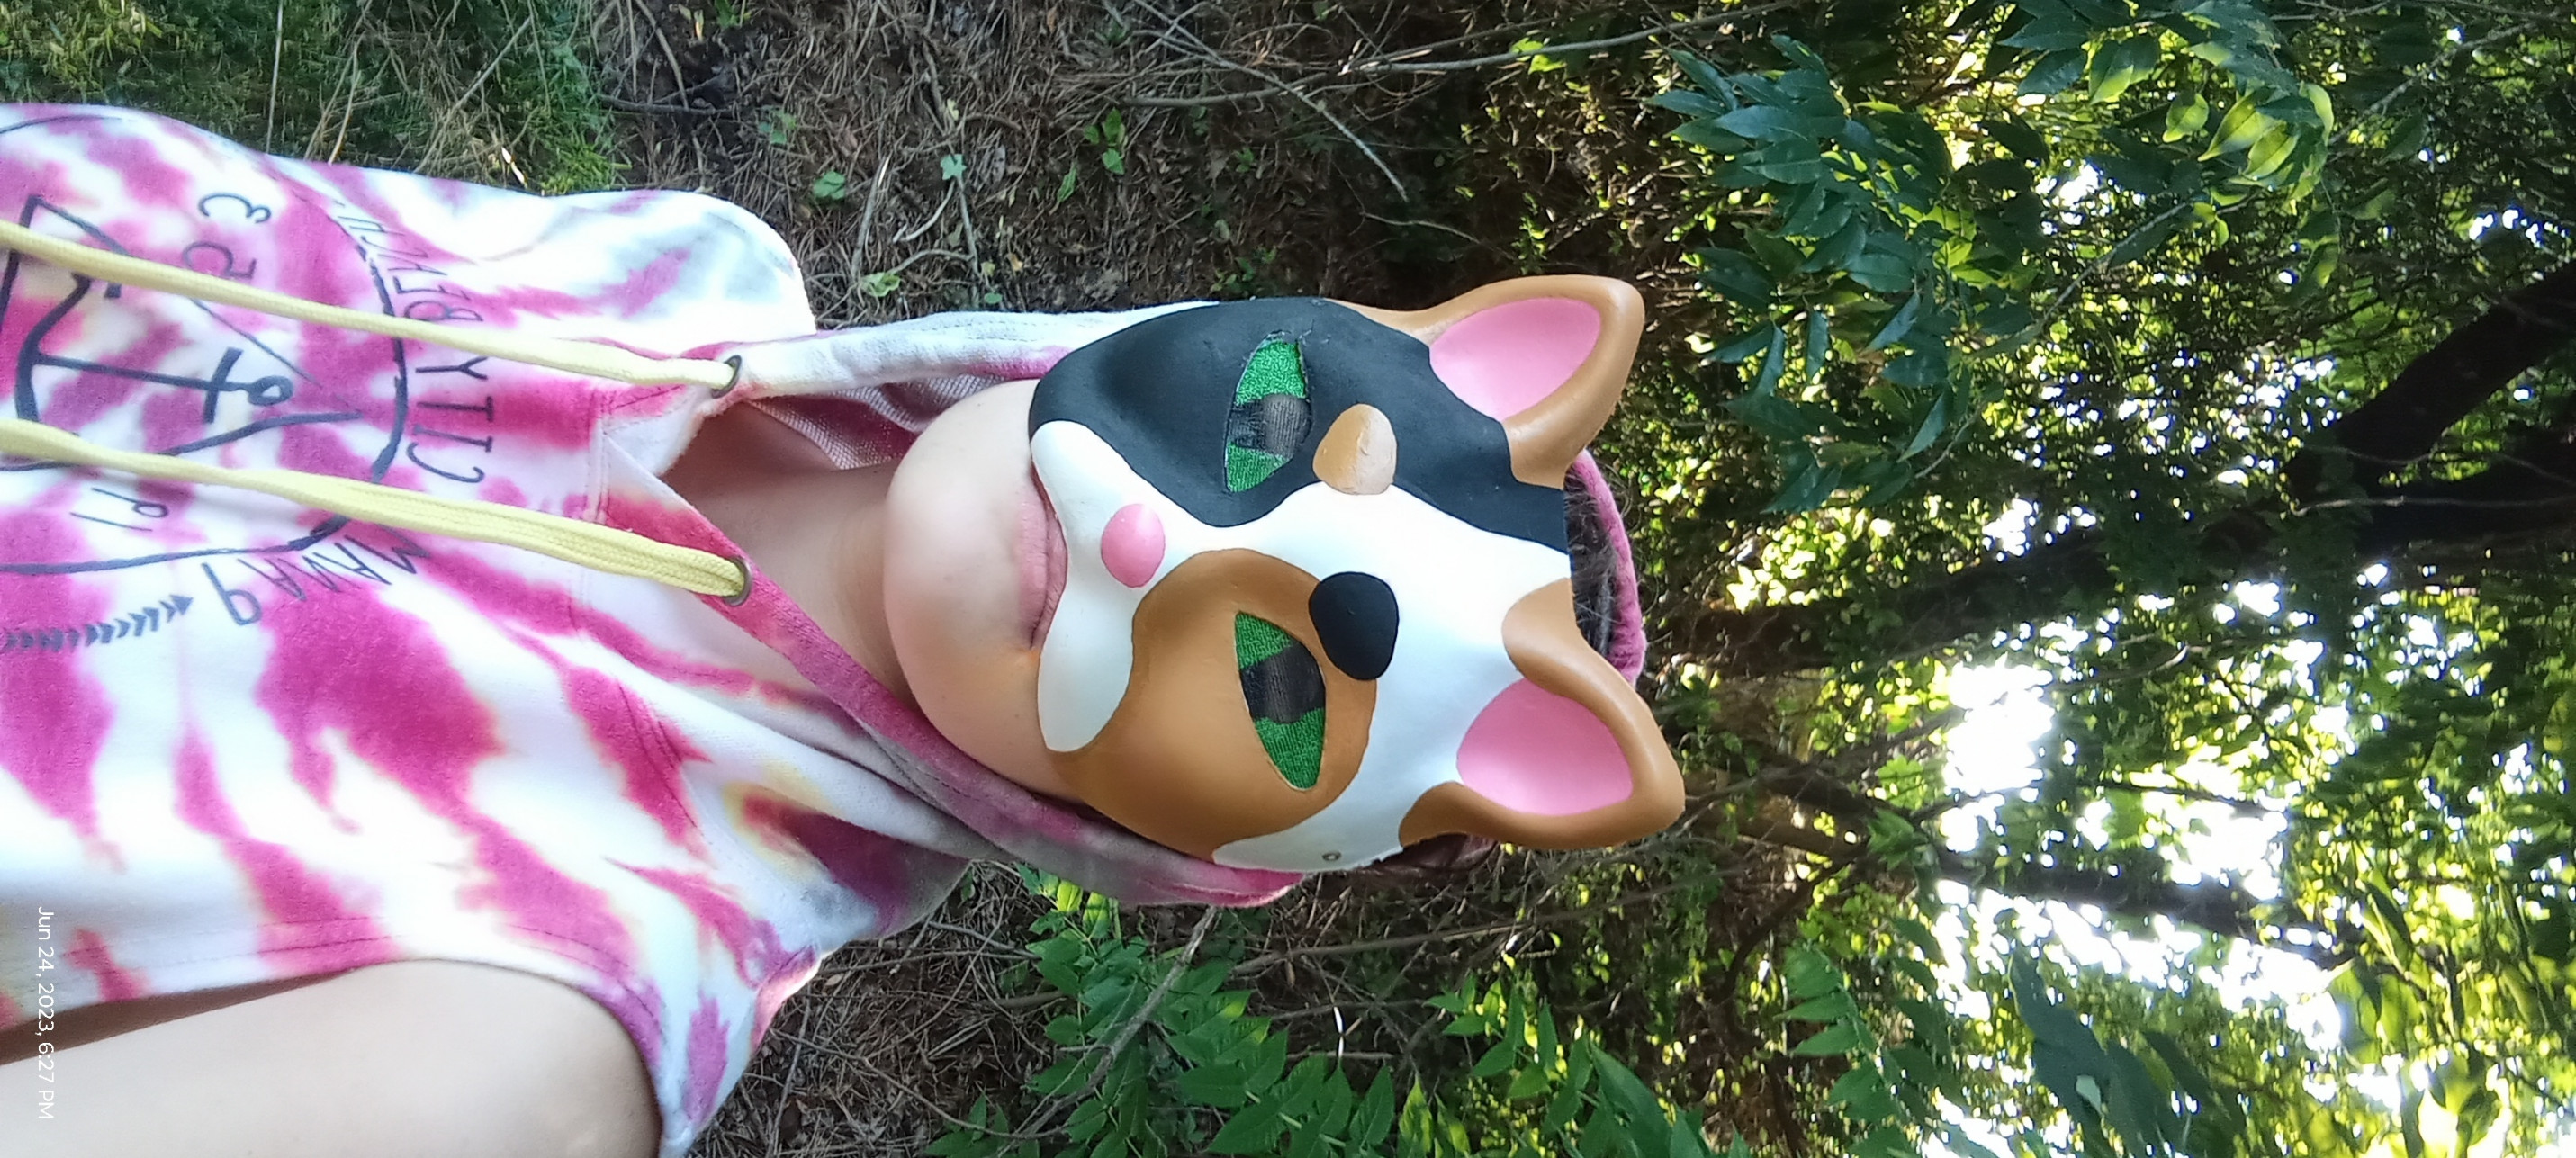 Therian Cat Anime Style Mask for Sale by KawaiiTrendZ